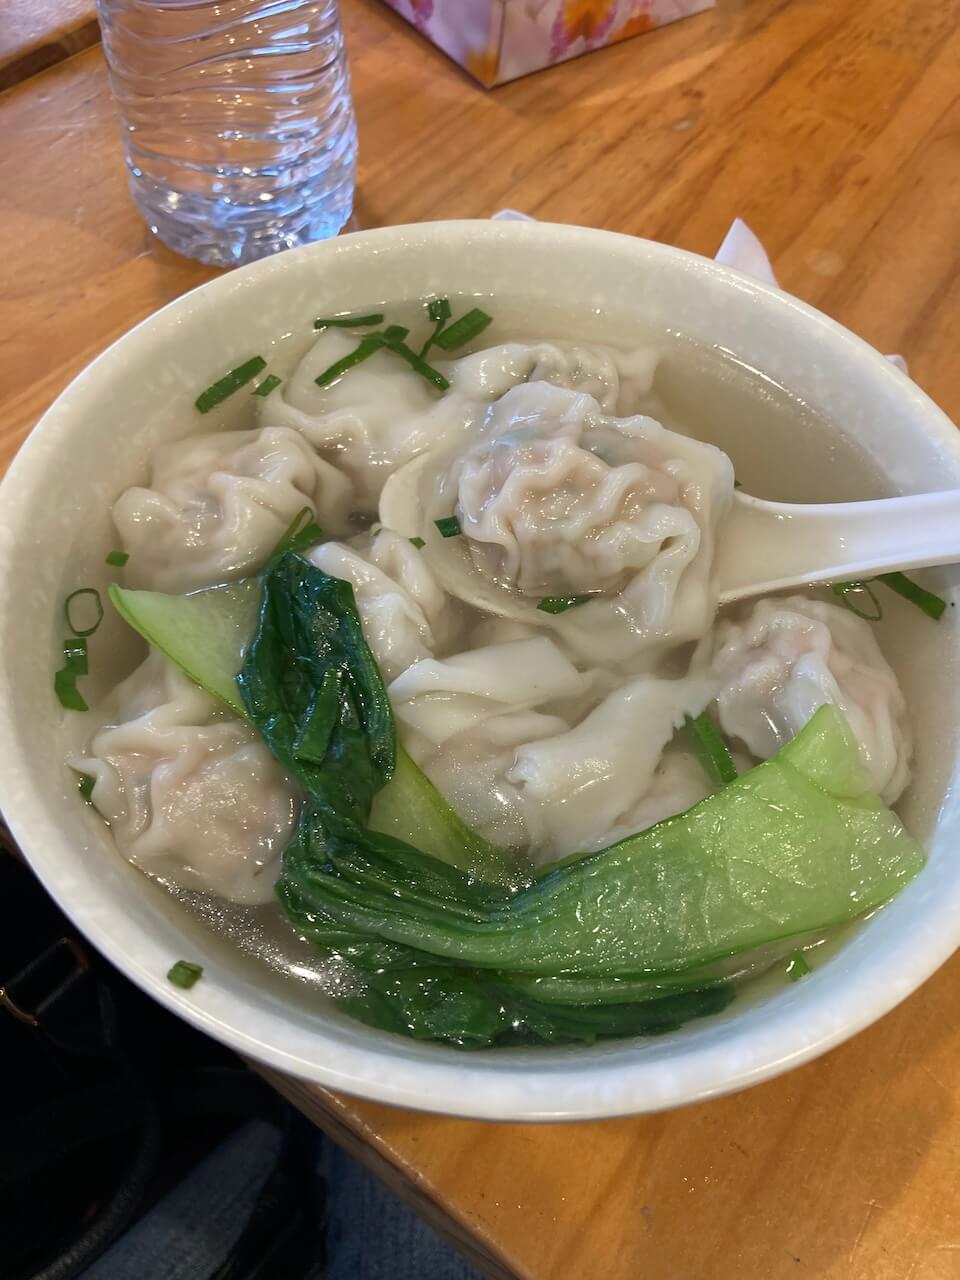 May what's up Wednesday-dumpling soup